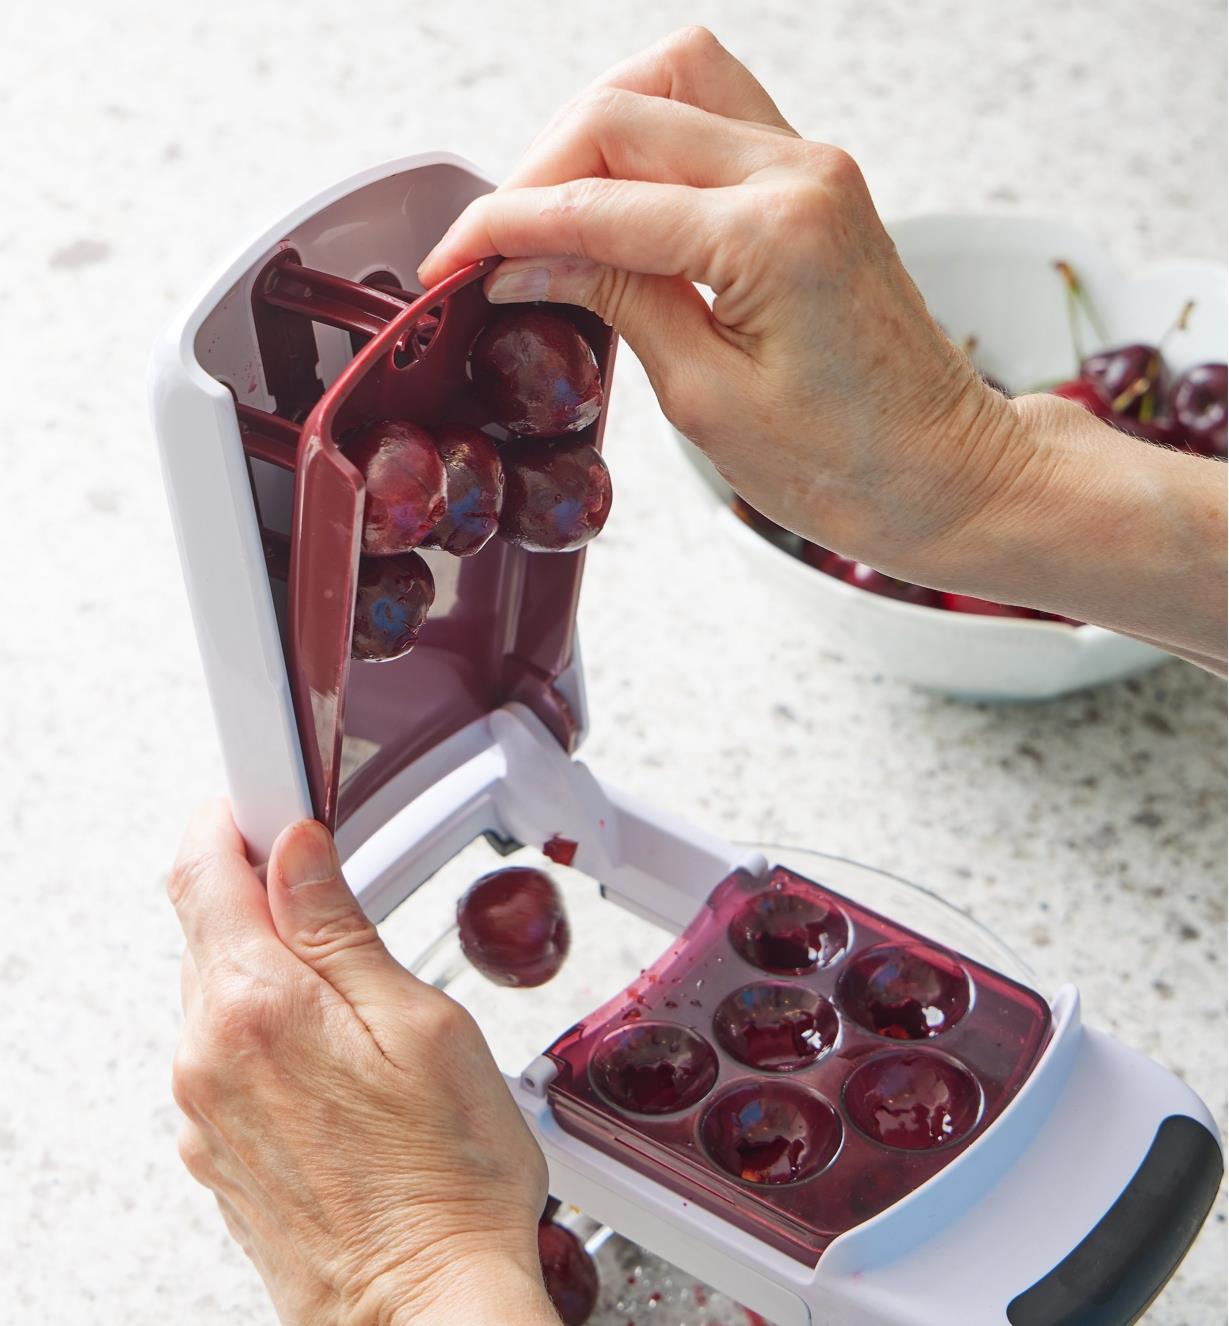 Lifting the top of the multi-cherry pitter to release the cherries into the bowl below